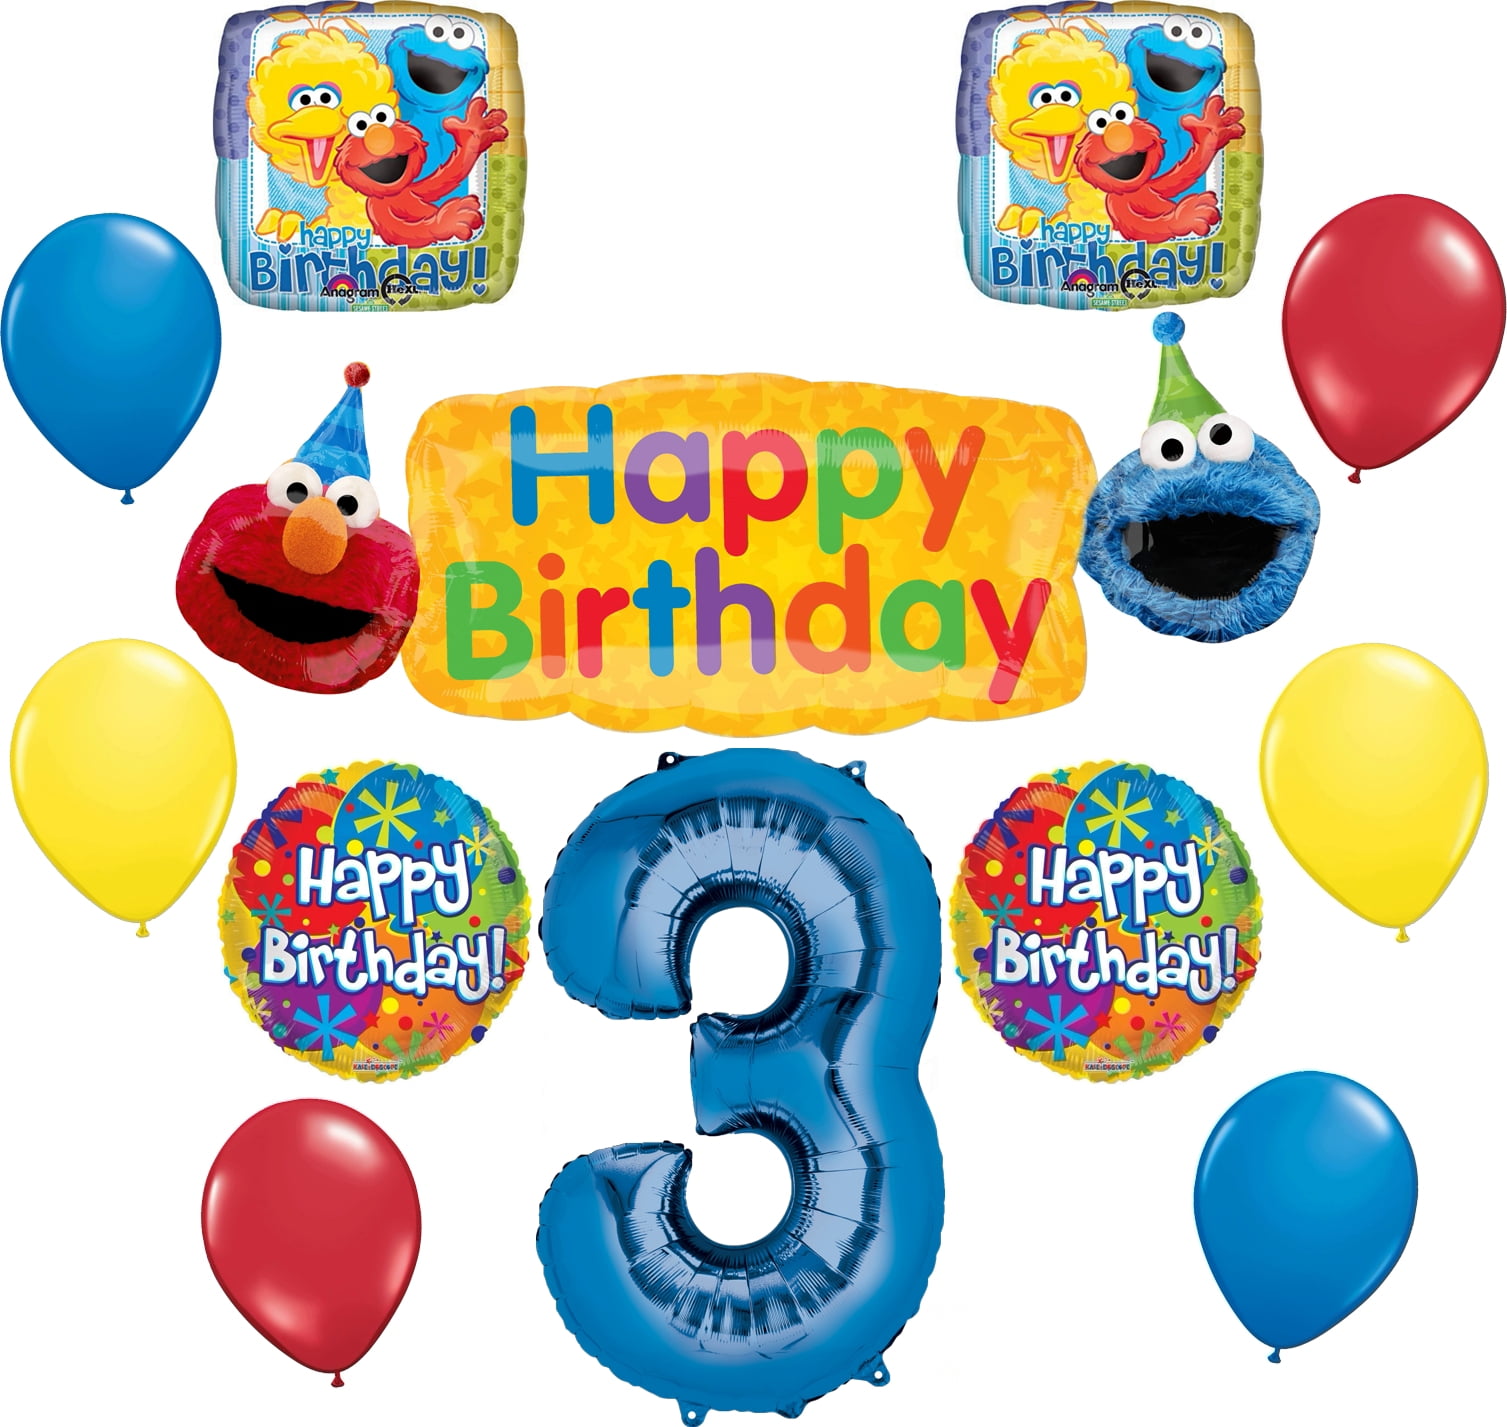  Canticos Birthday Party Decorations, Cartoon Kids Songs Party  Supplies with Happy Birthday Banner, Cupcake Cake Toppers, Balloons for  Kids Birthday Party Baby Shower Decorations : Toys & Games